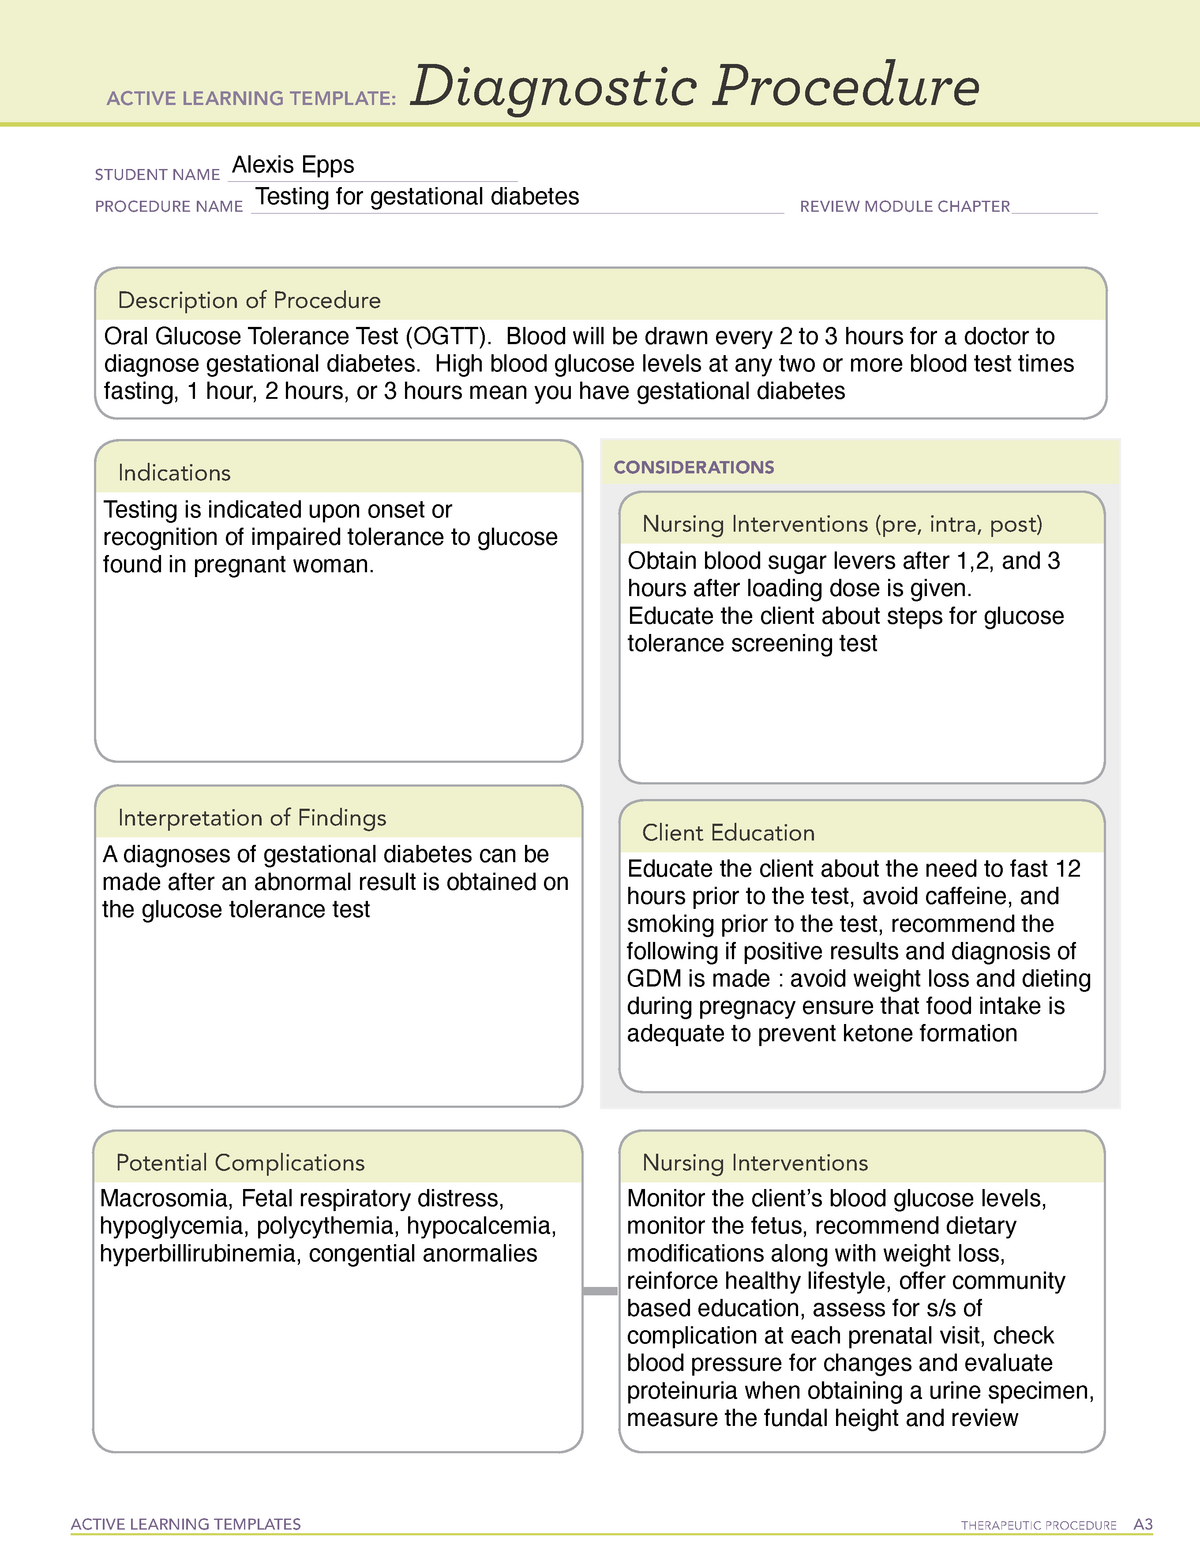 active-learning-template-diagnostic-procedure-form-active-learning-templates-therapeutic